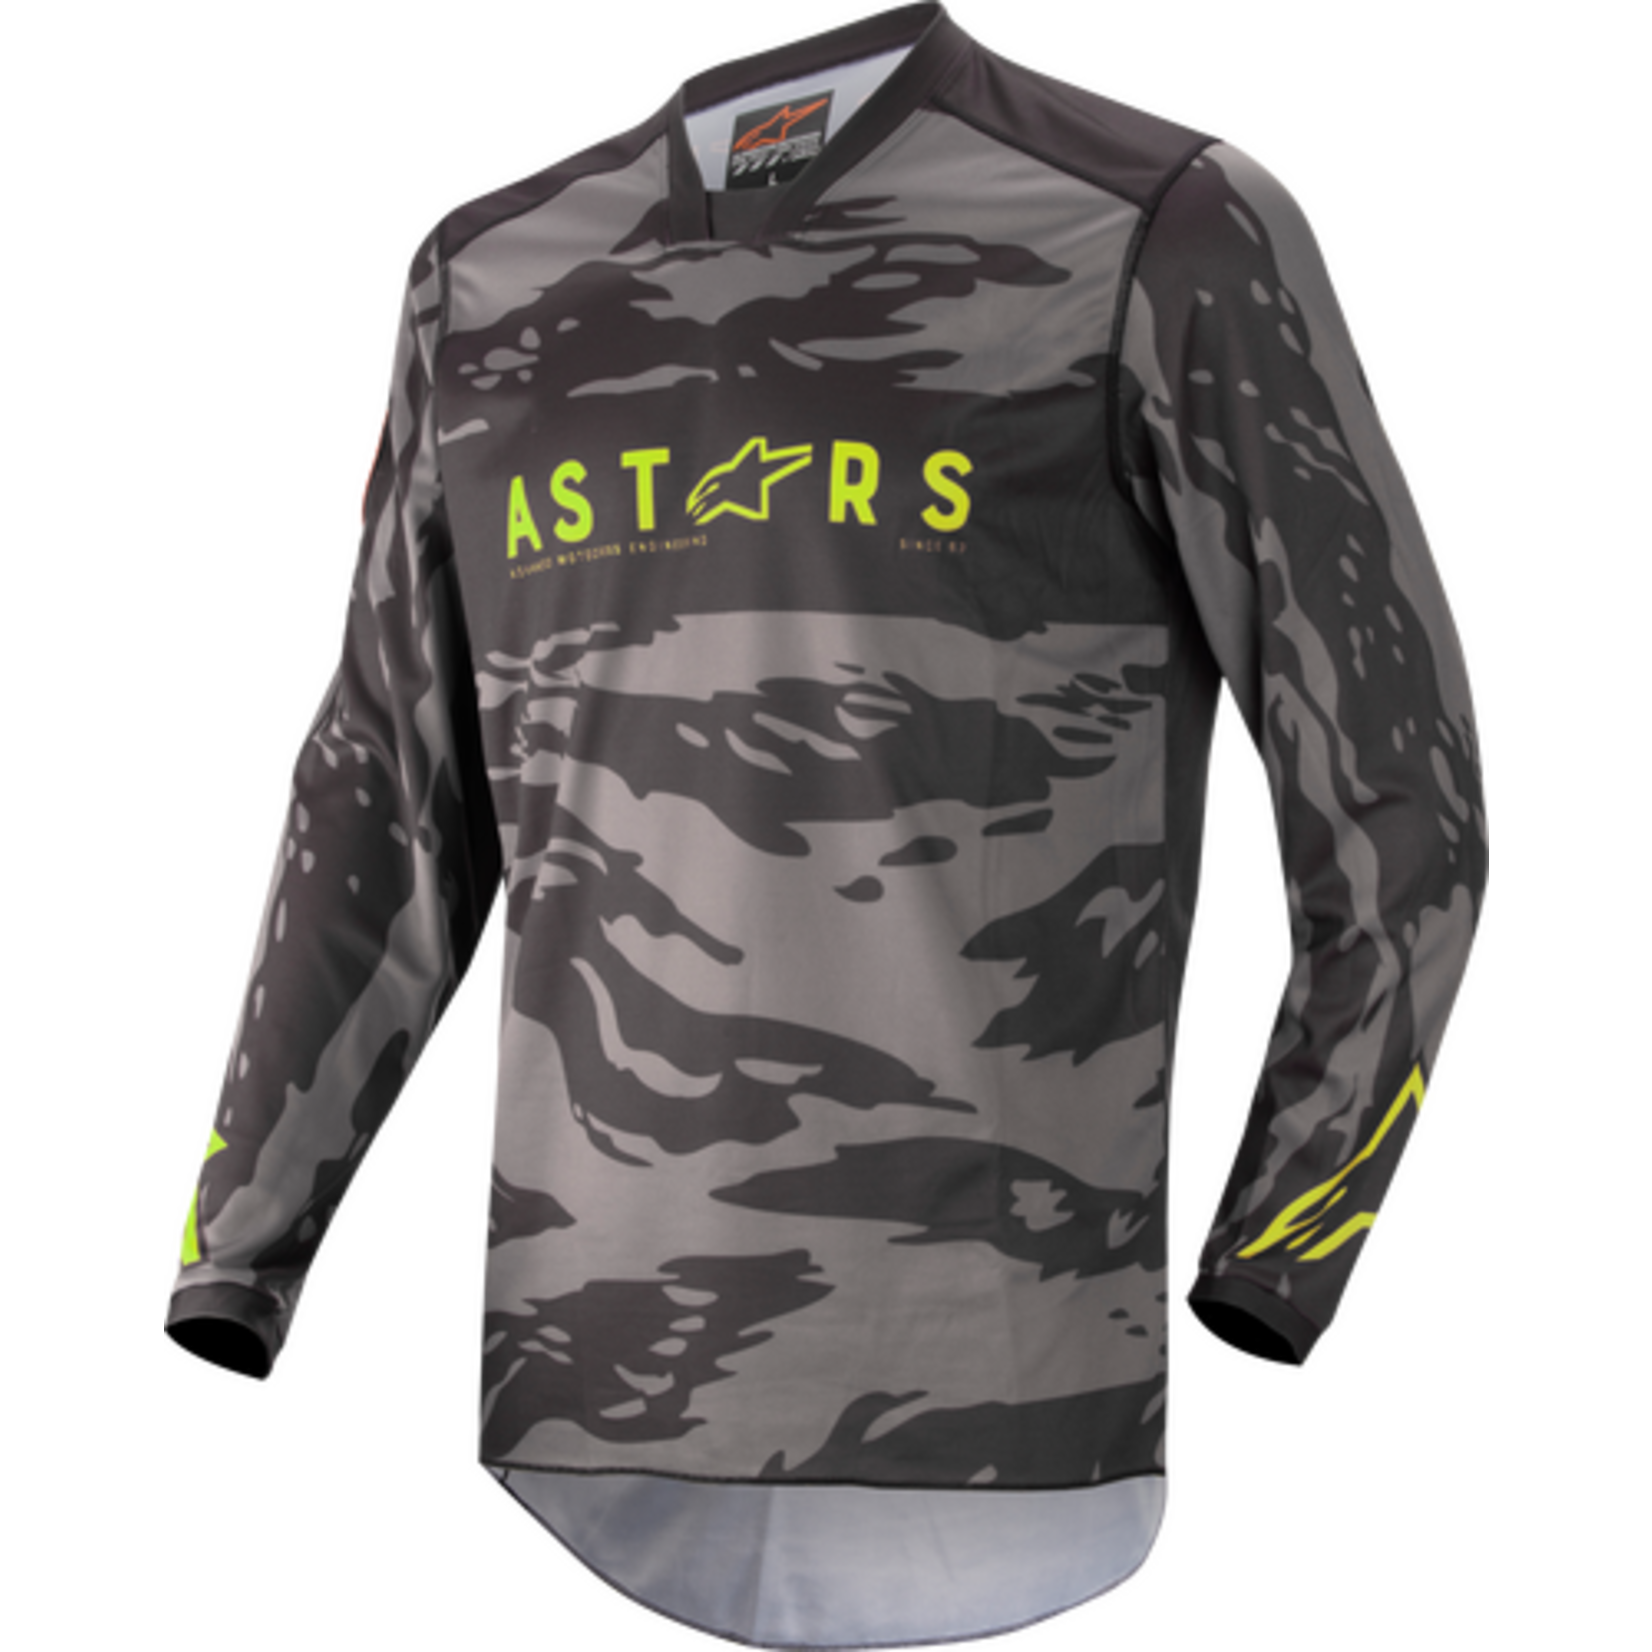 ALPINESTARS Youth Racer Tactical Jersey